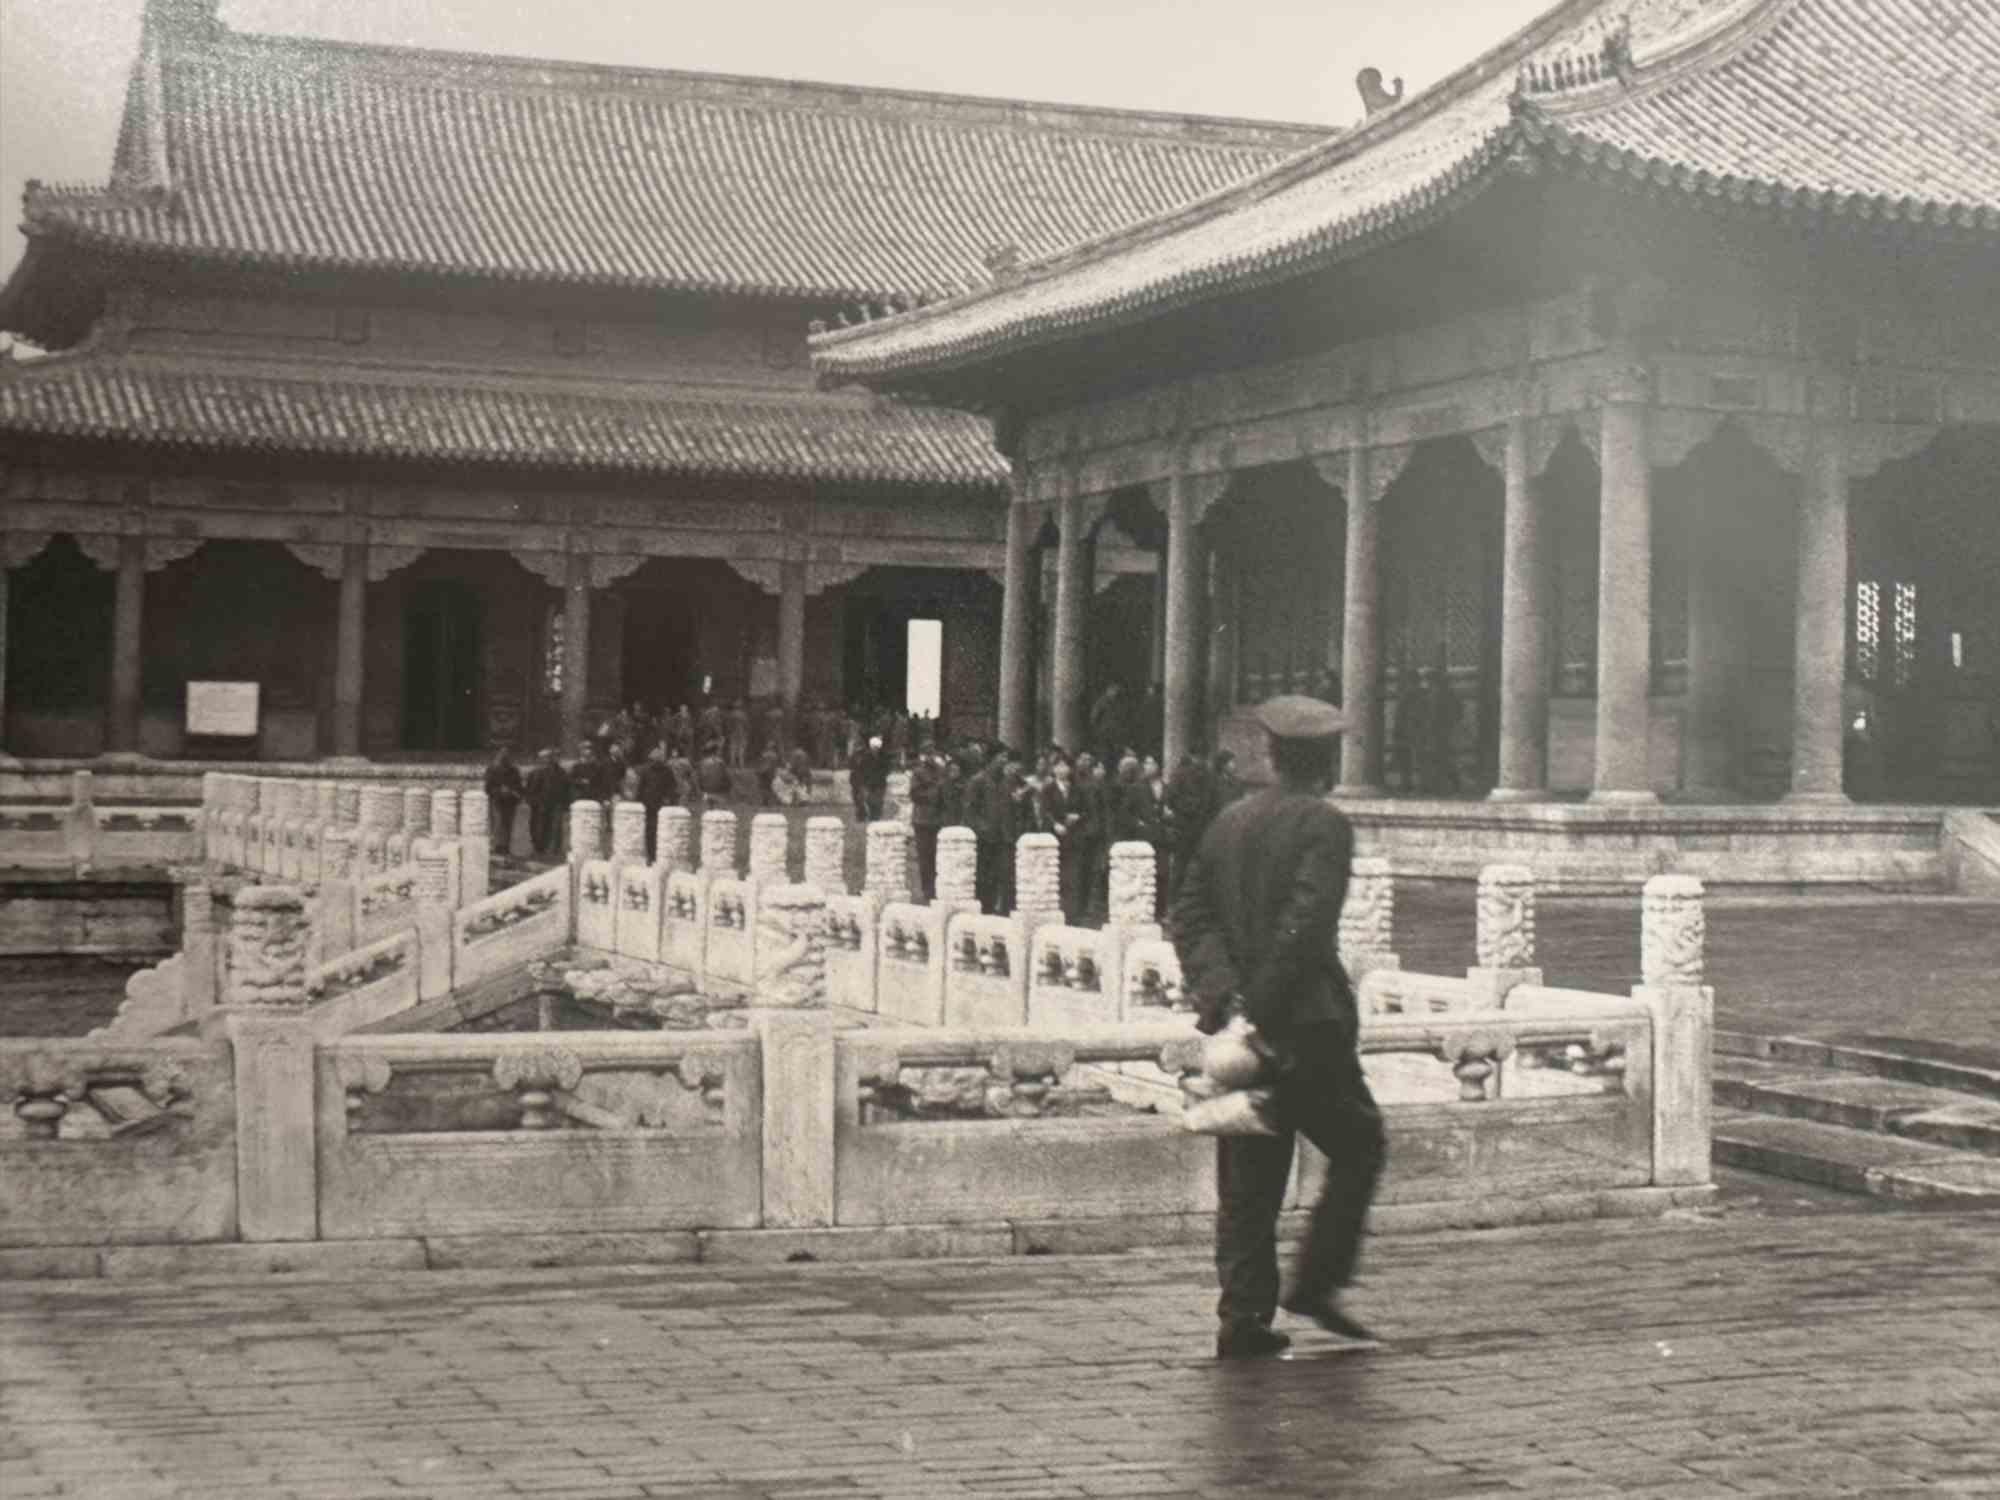 Unknown Figurative Photograph - Historical Photo - The Forbidden City Beijing - Vintage photo - 1960s